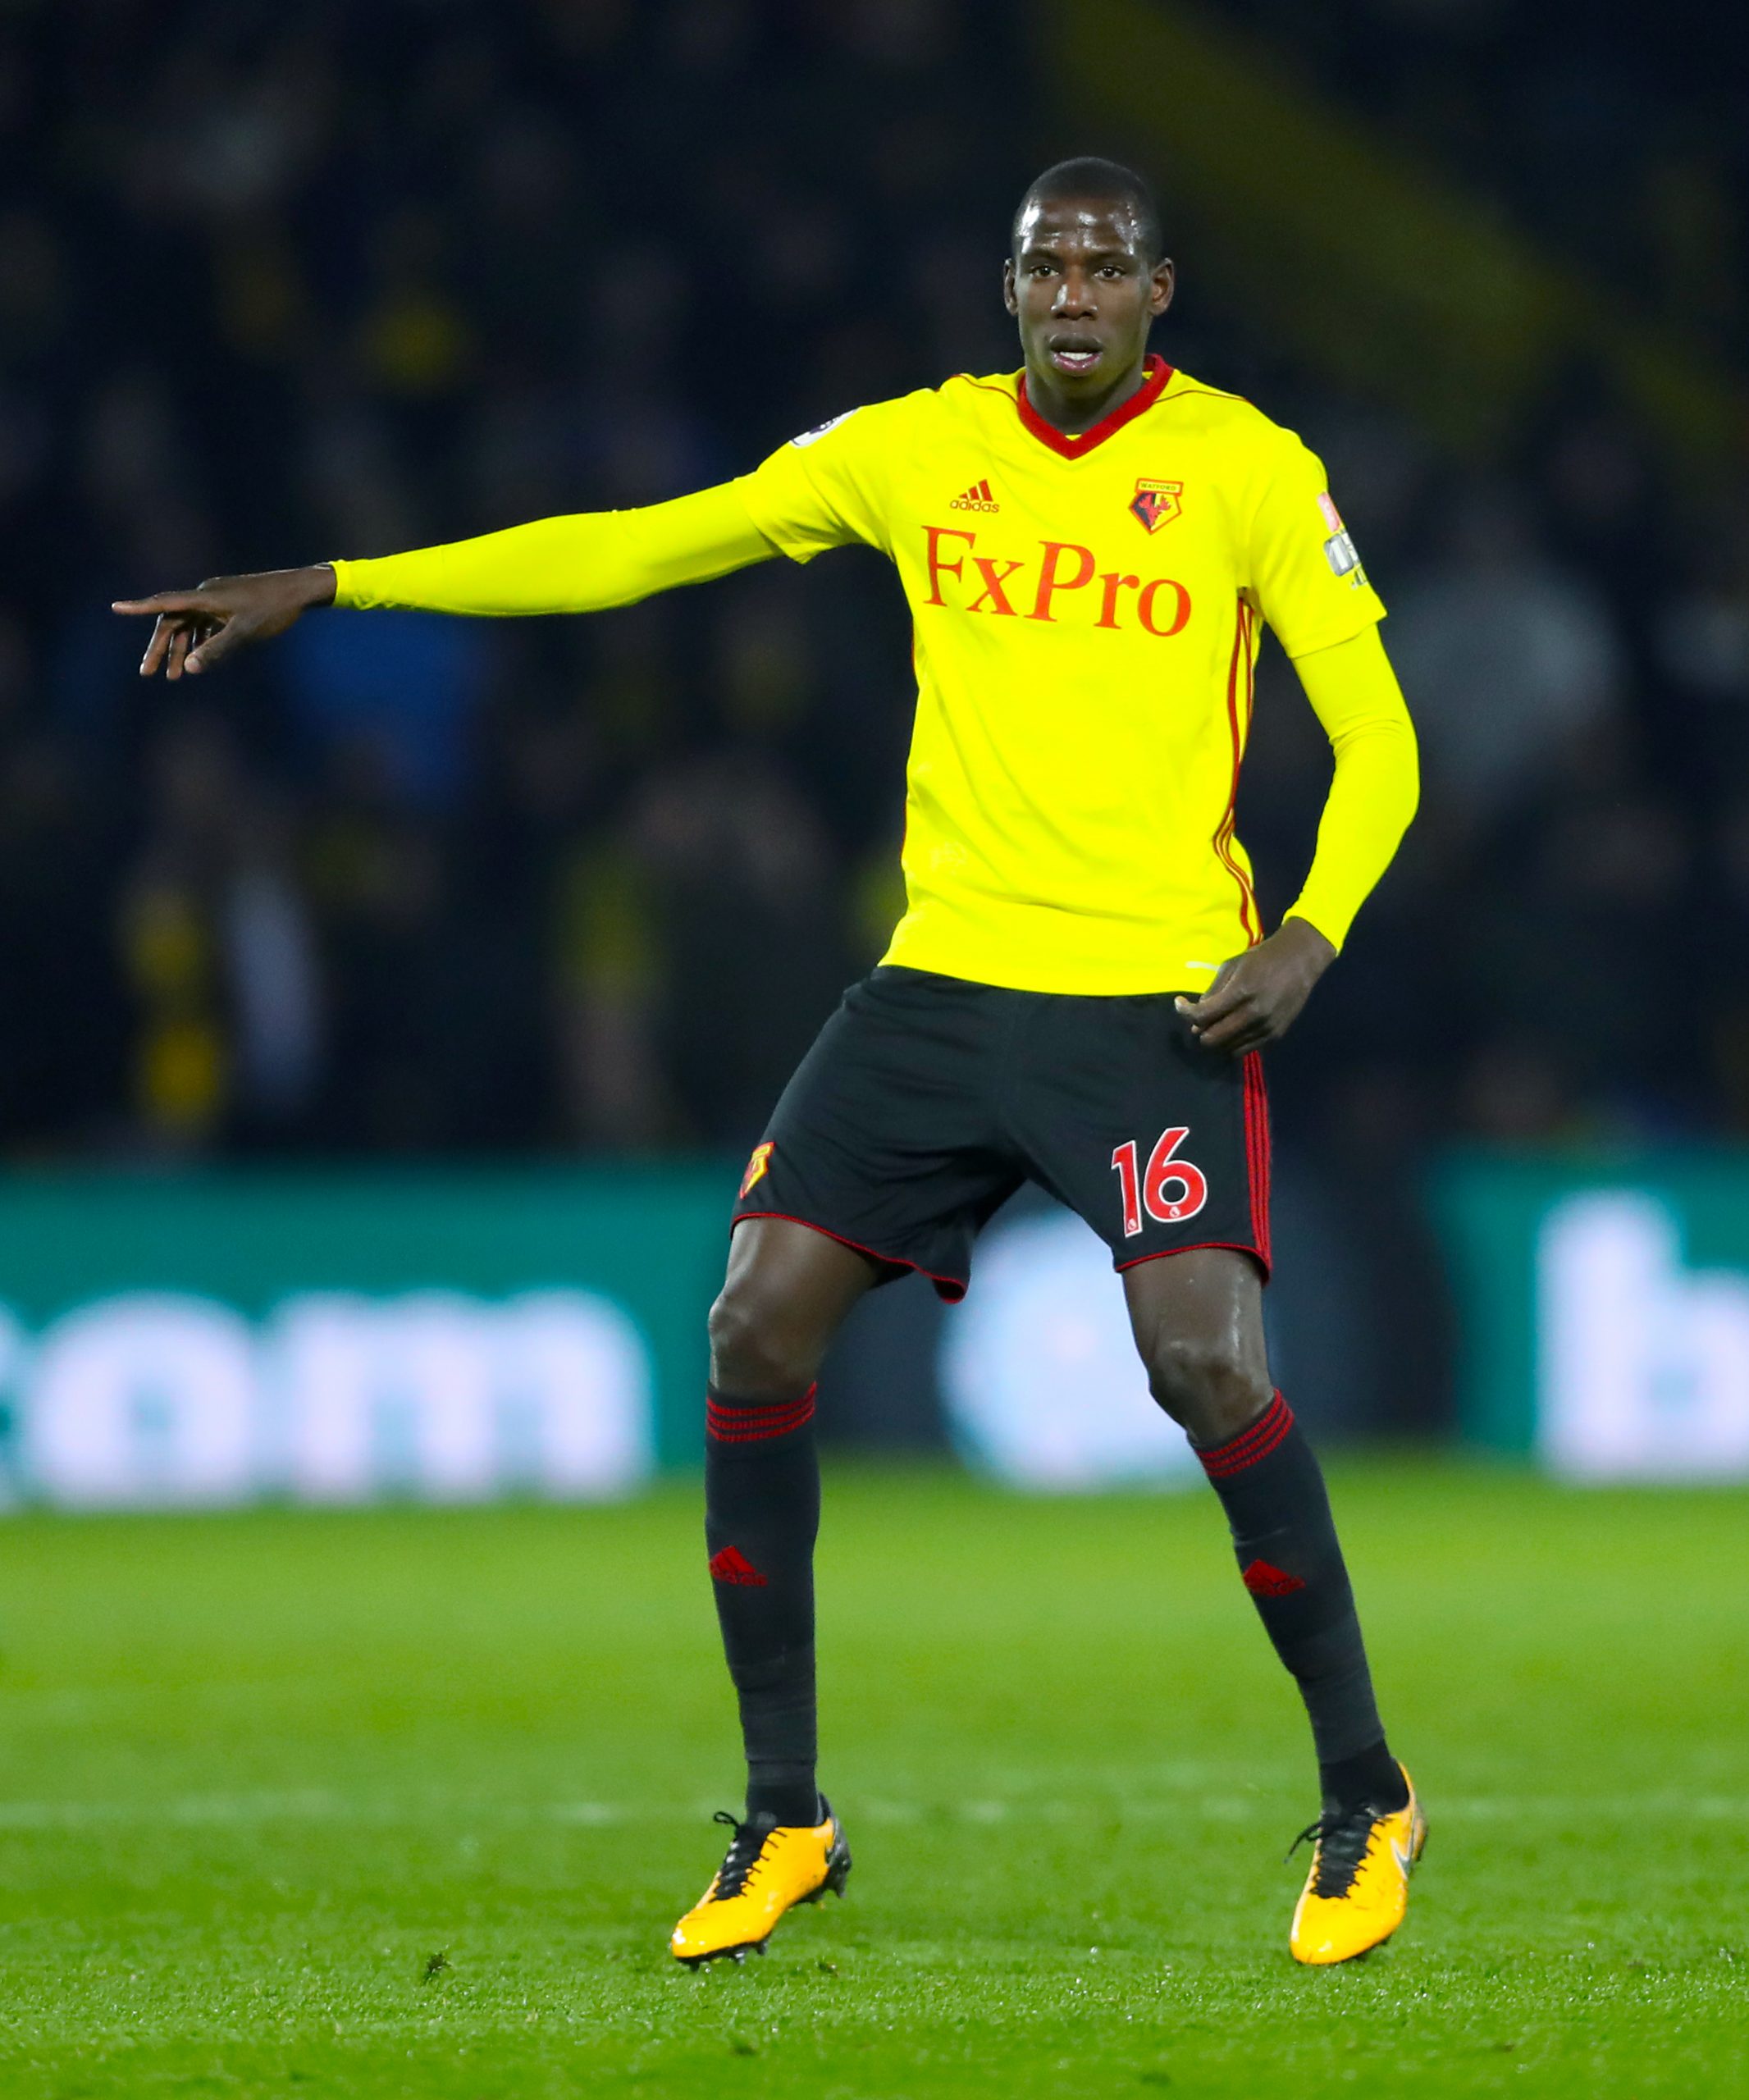 How Good is Watford’s Abdoulaye Doucouré?